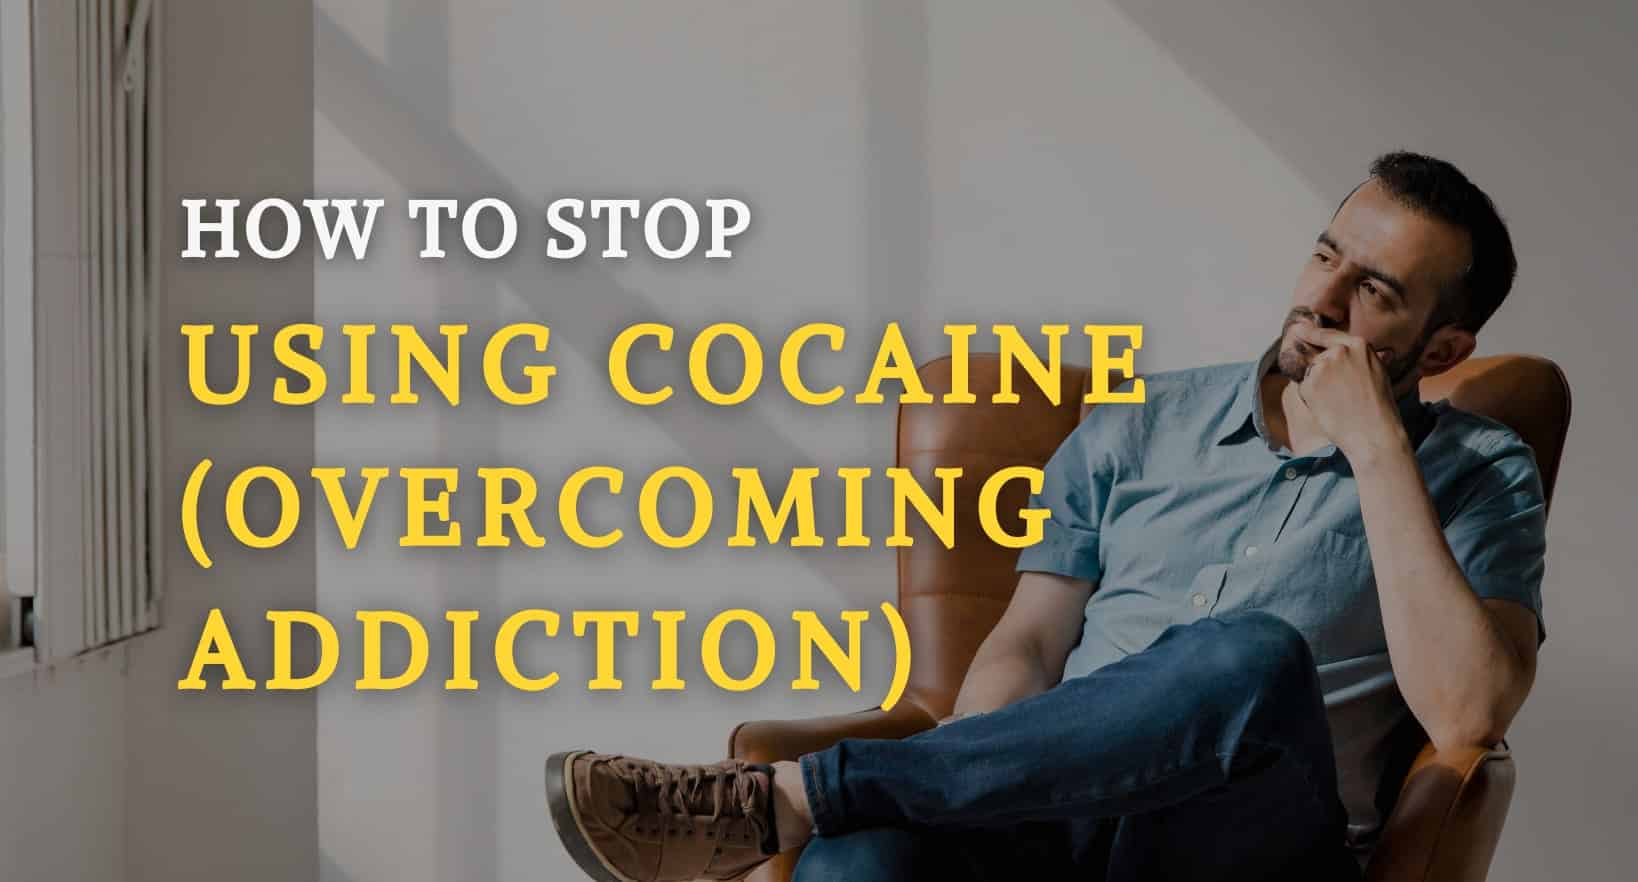 How to Stop Using Cocaine (Overcoming Addiction)